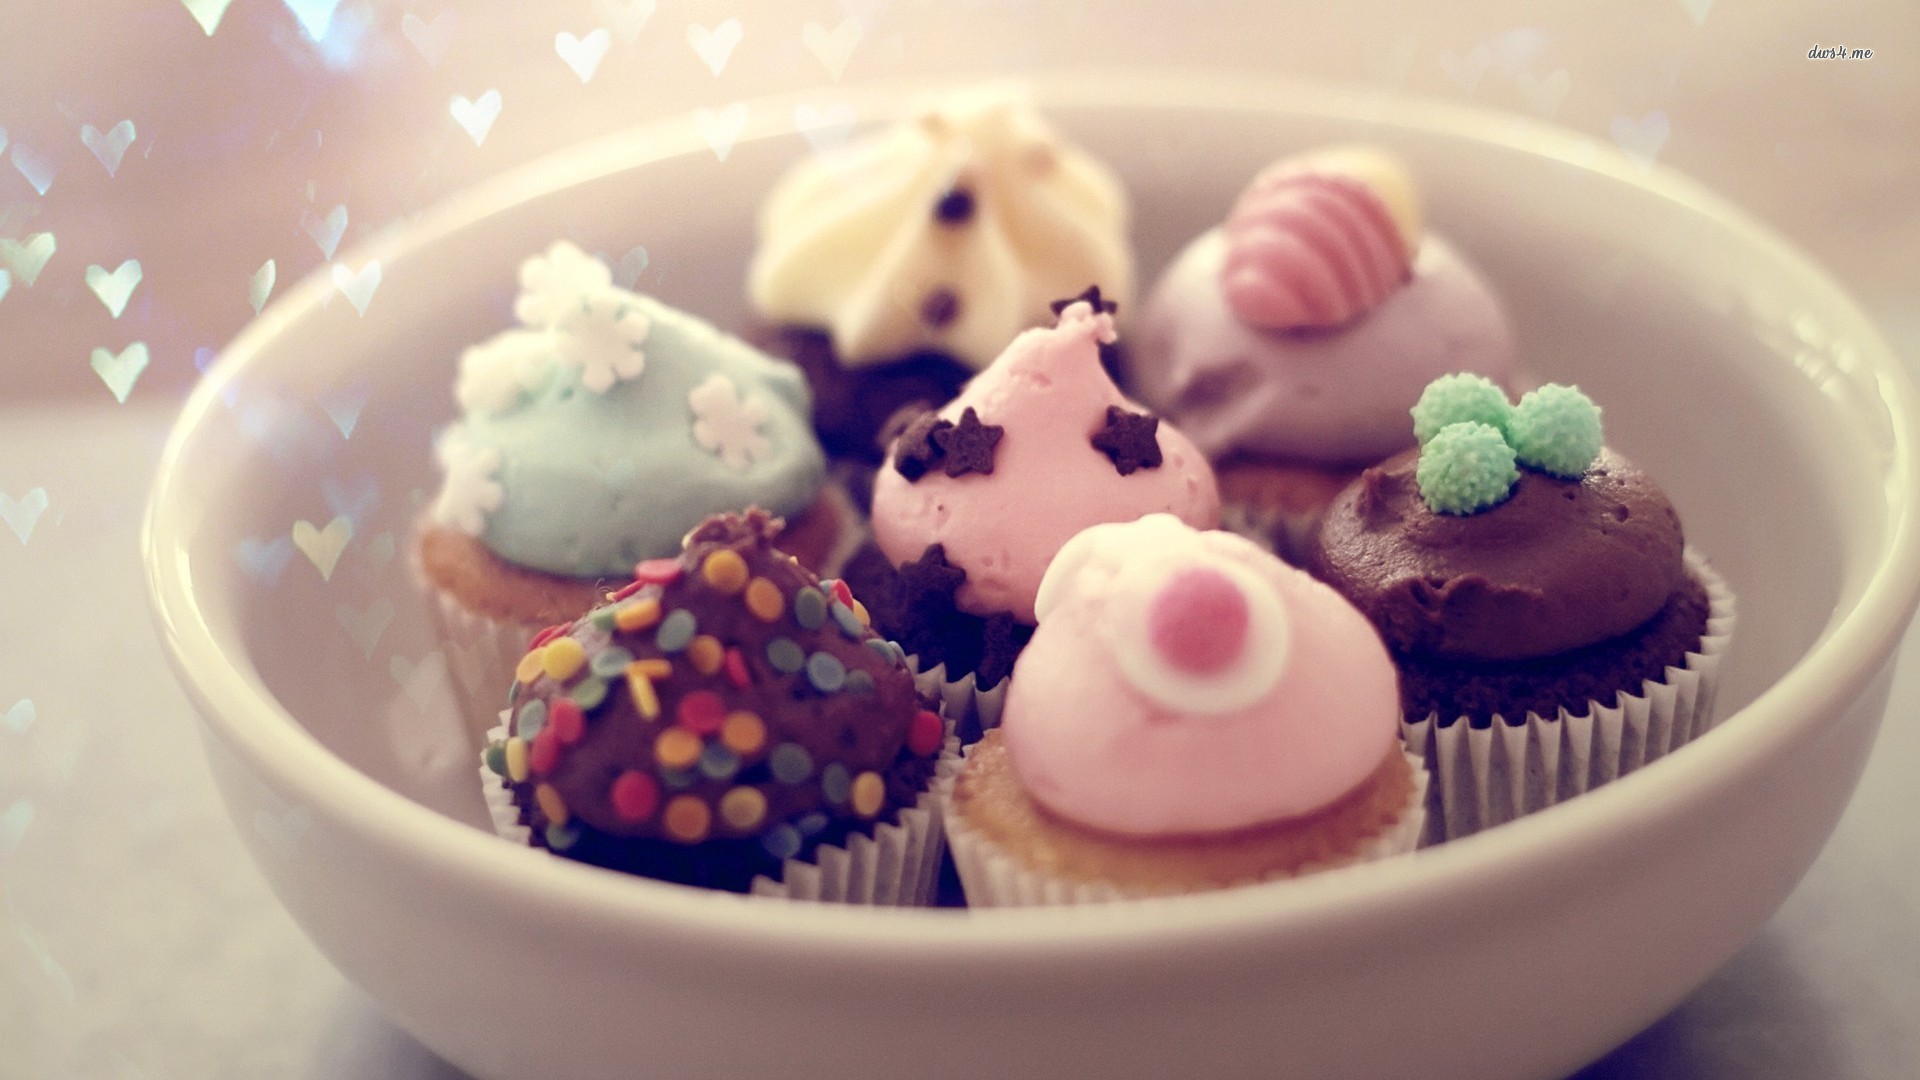 Cupcakes wallpaper - Photography wallpapers - #10248